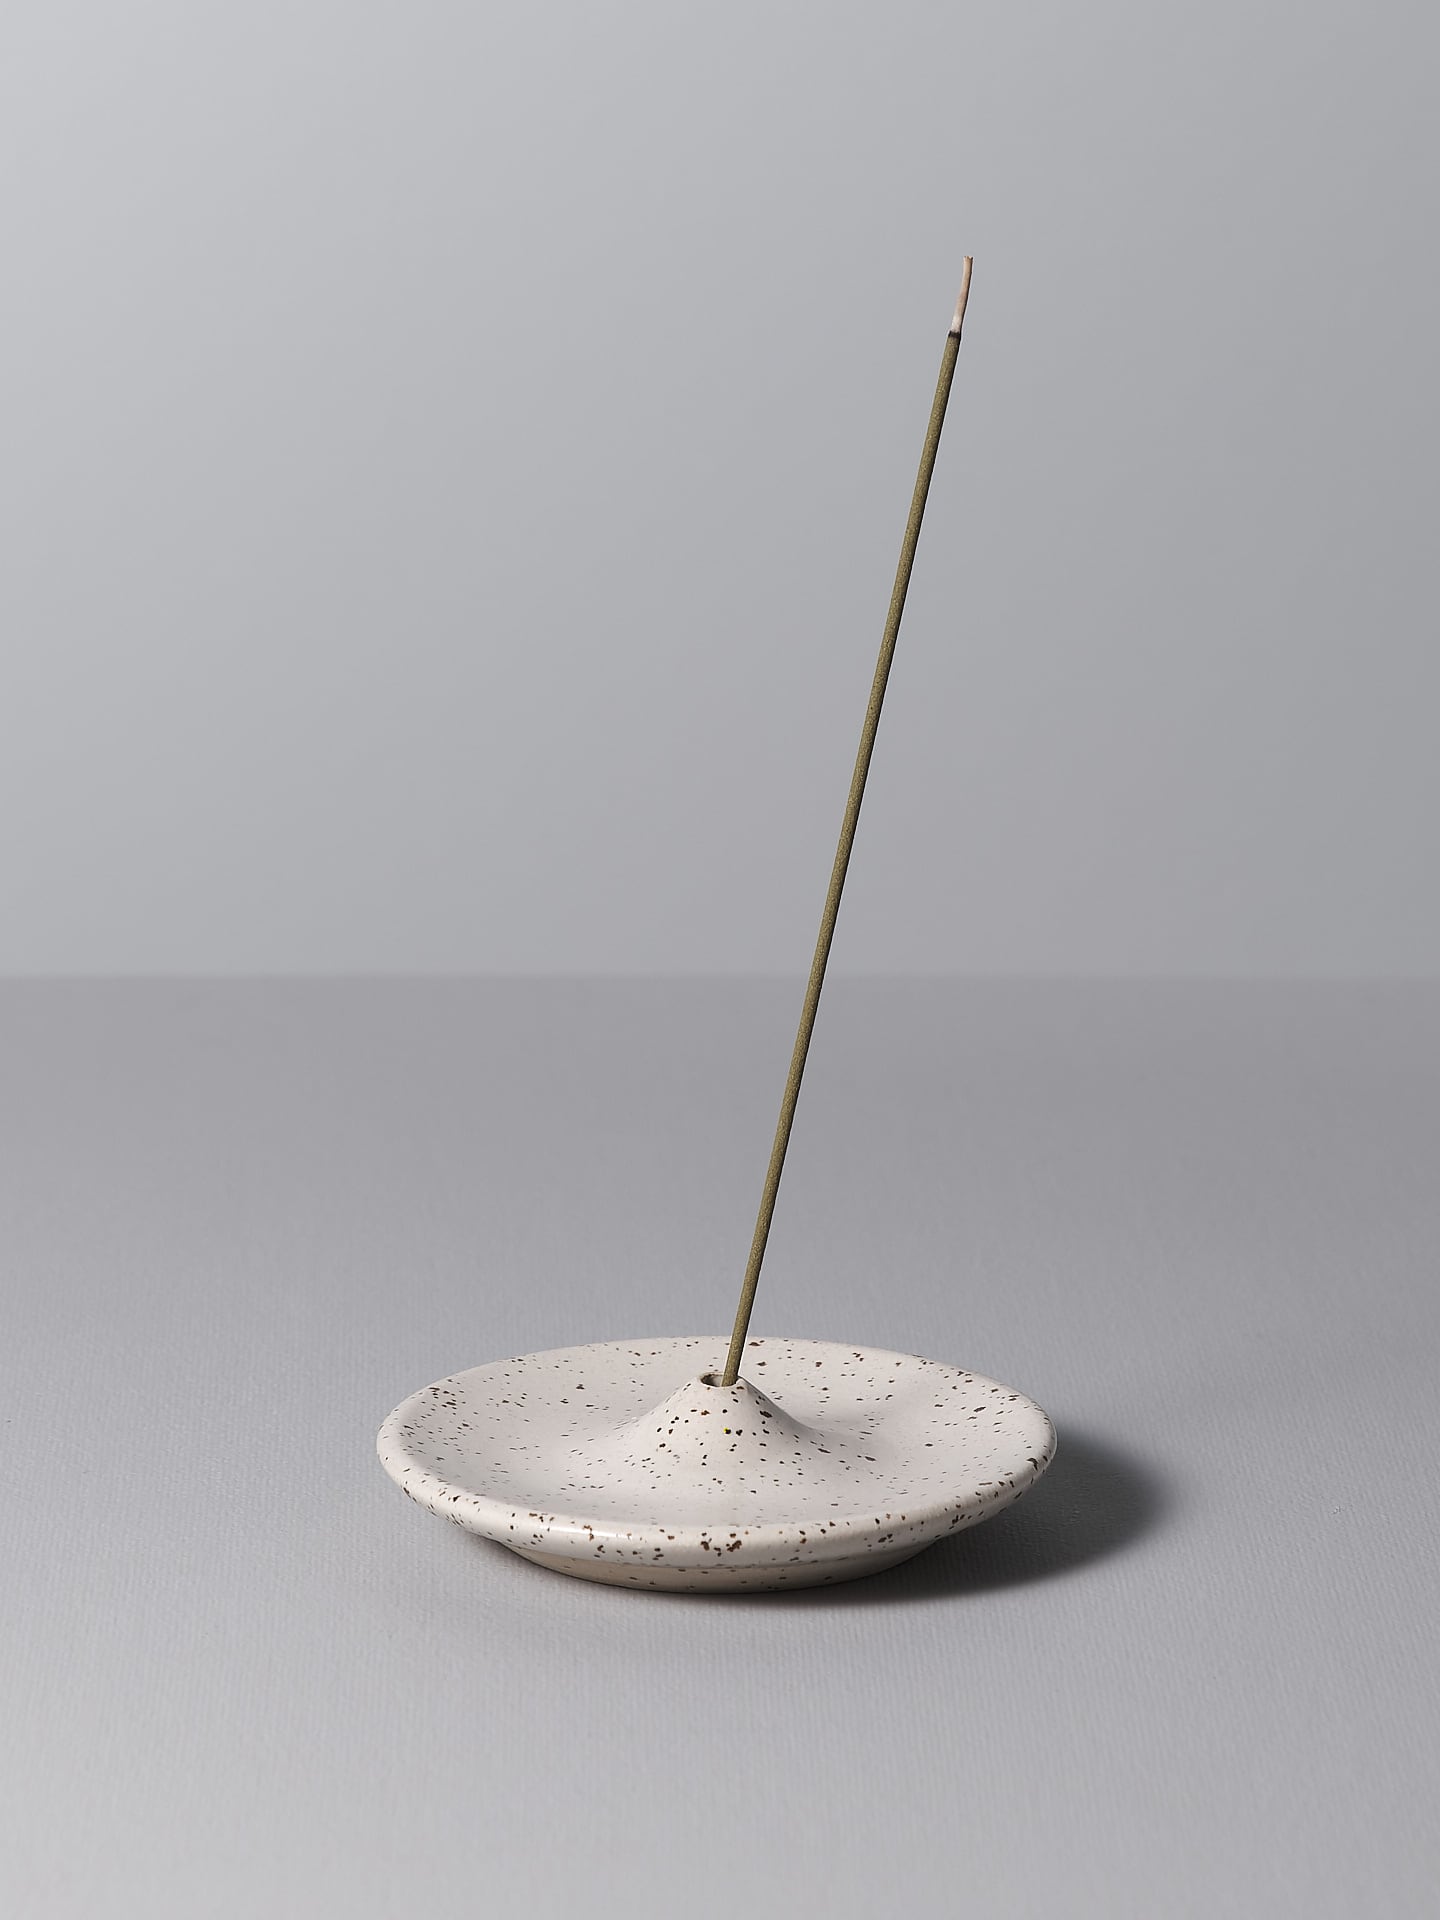 An Incense Holder - Speckled White by Nicola Shuttleworth on a white plate.